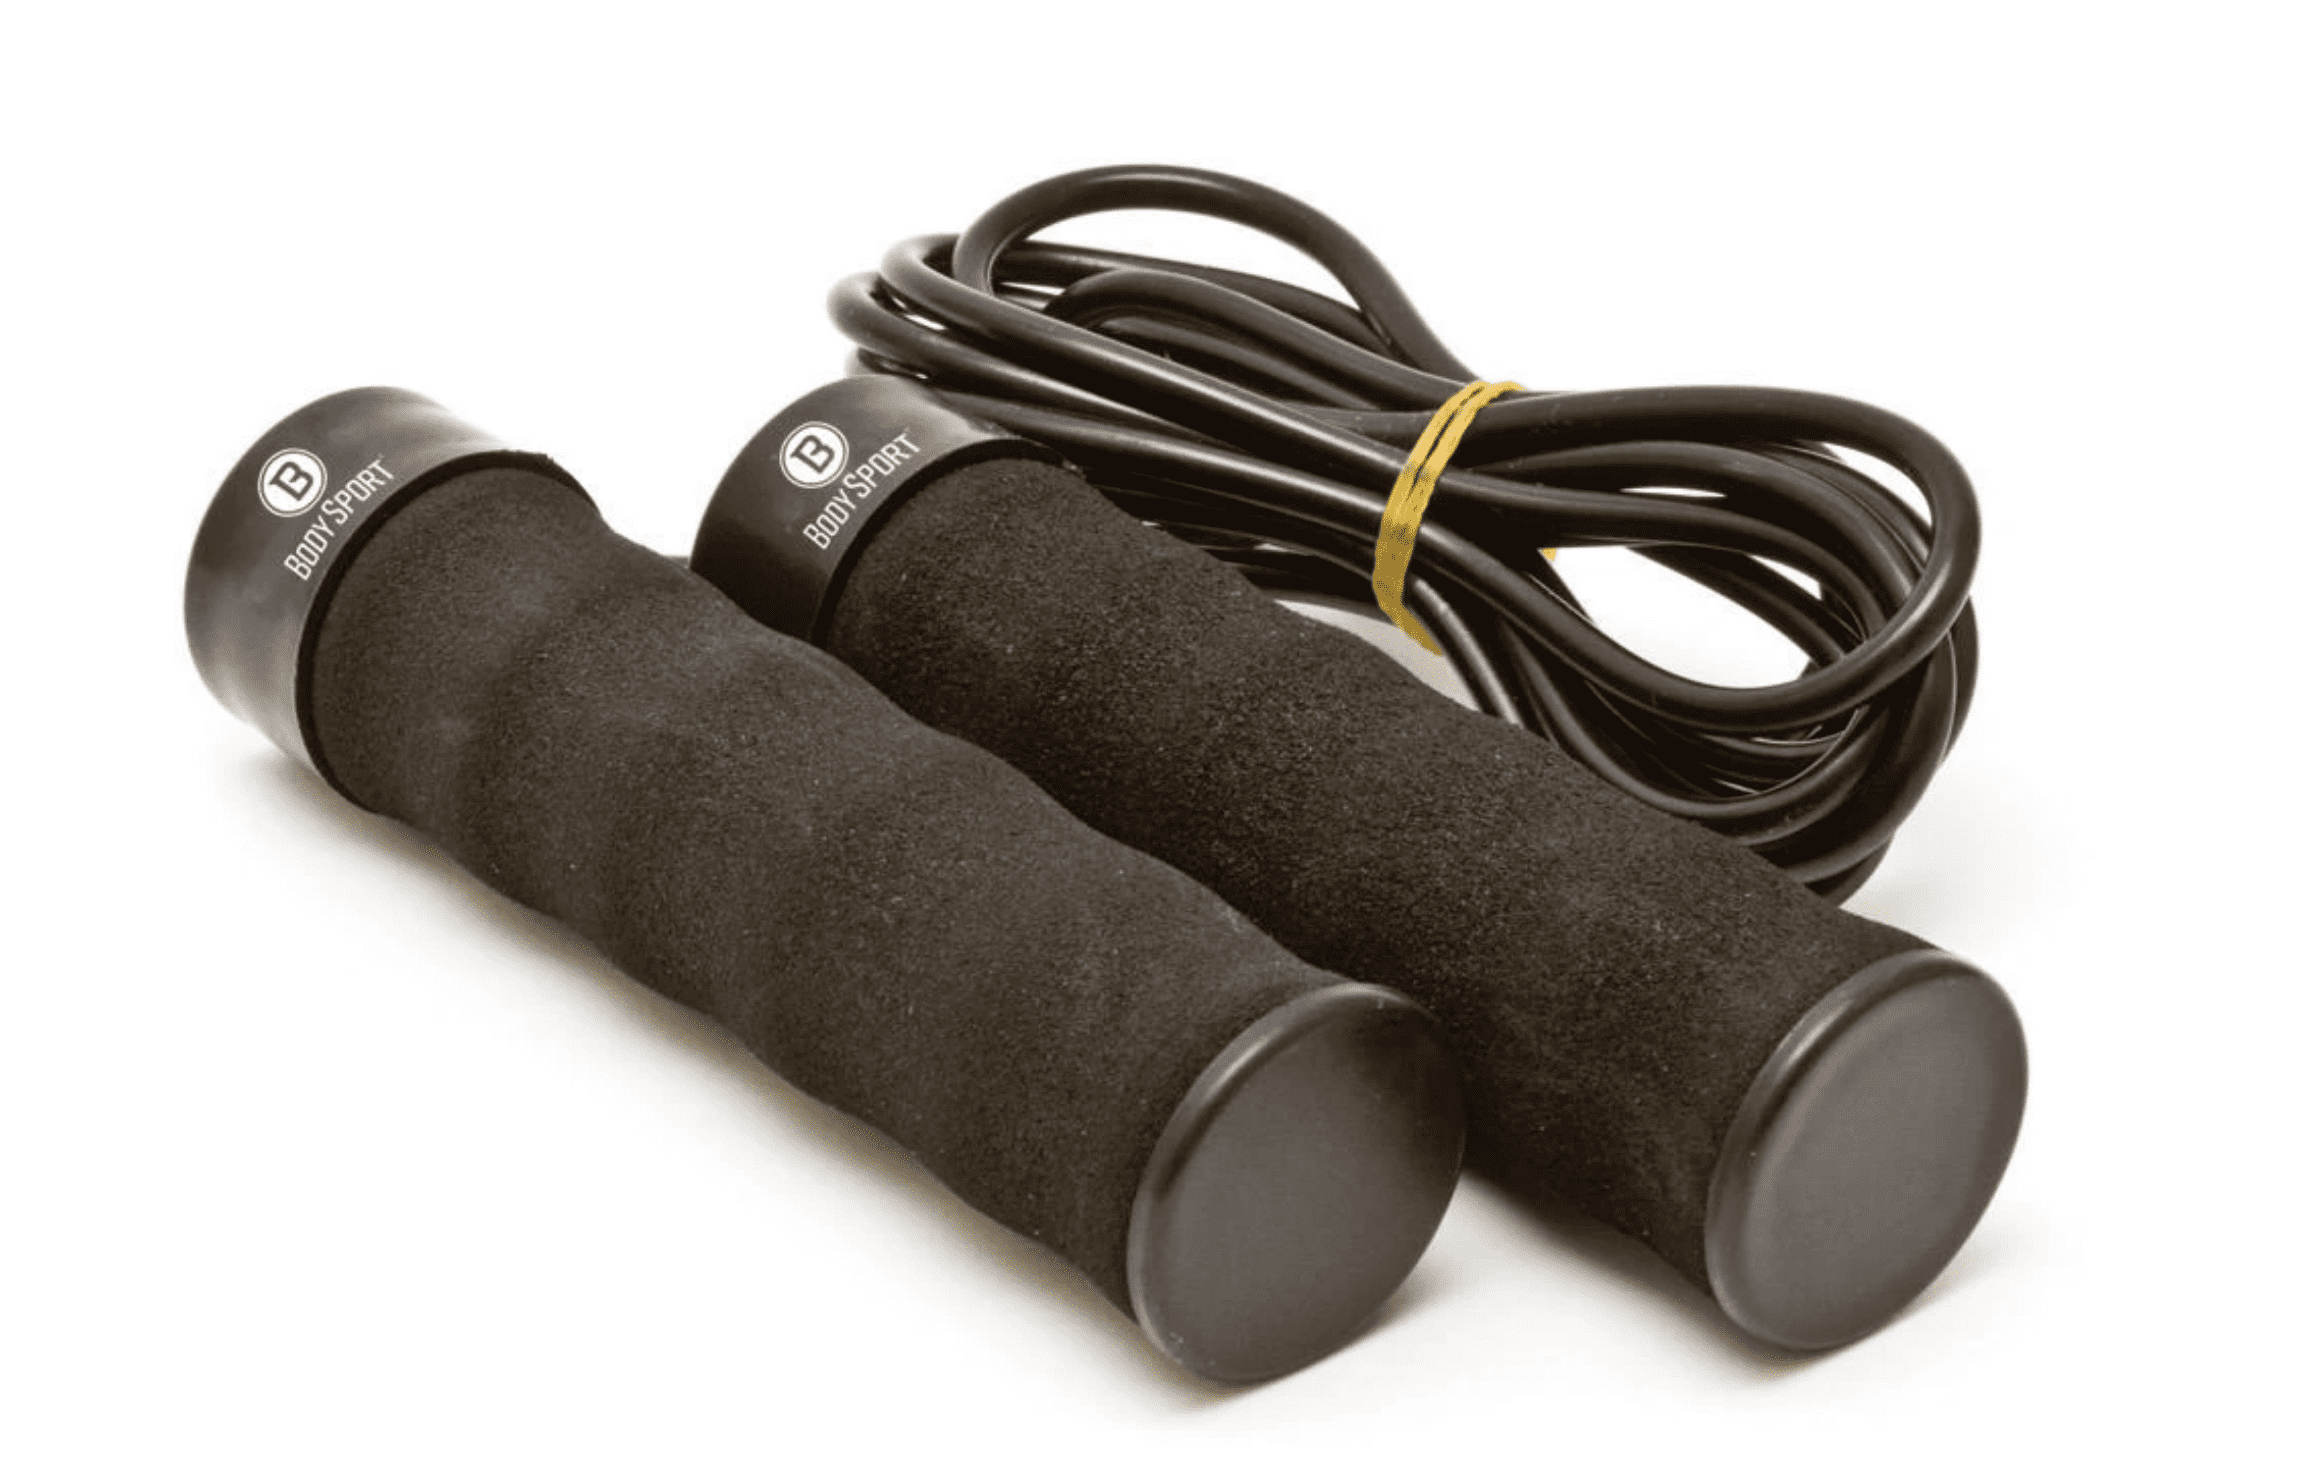 Details about   FitFindGo Weighted Jump Rope 1LB Adjustable Heavy Jump Rope for Fitness Training 